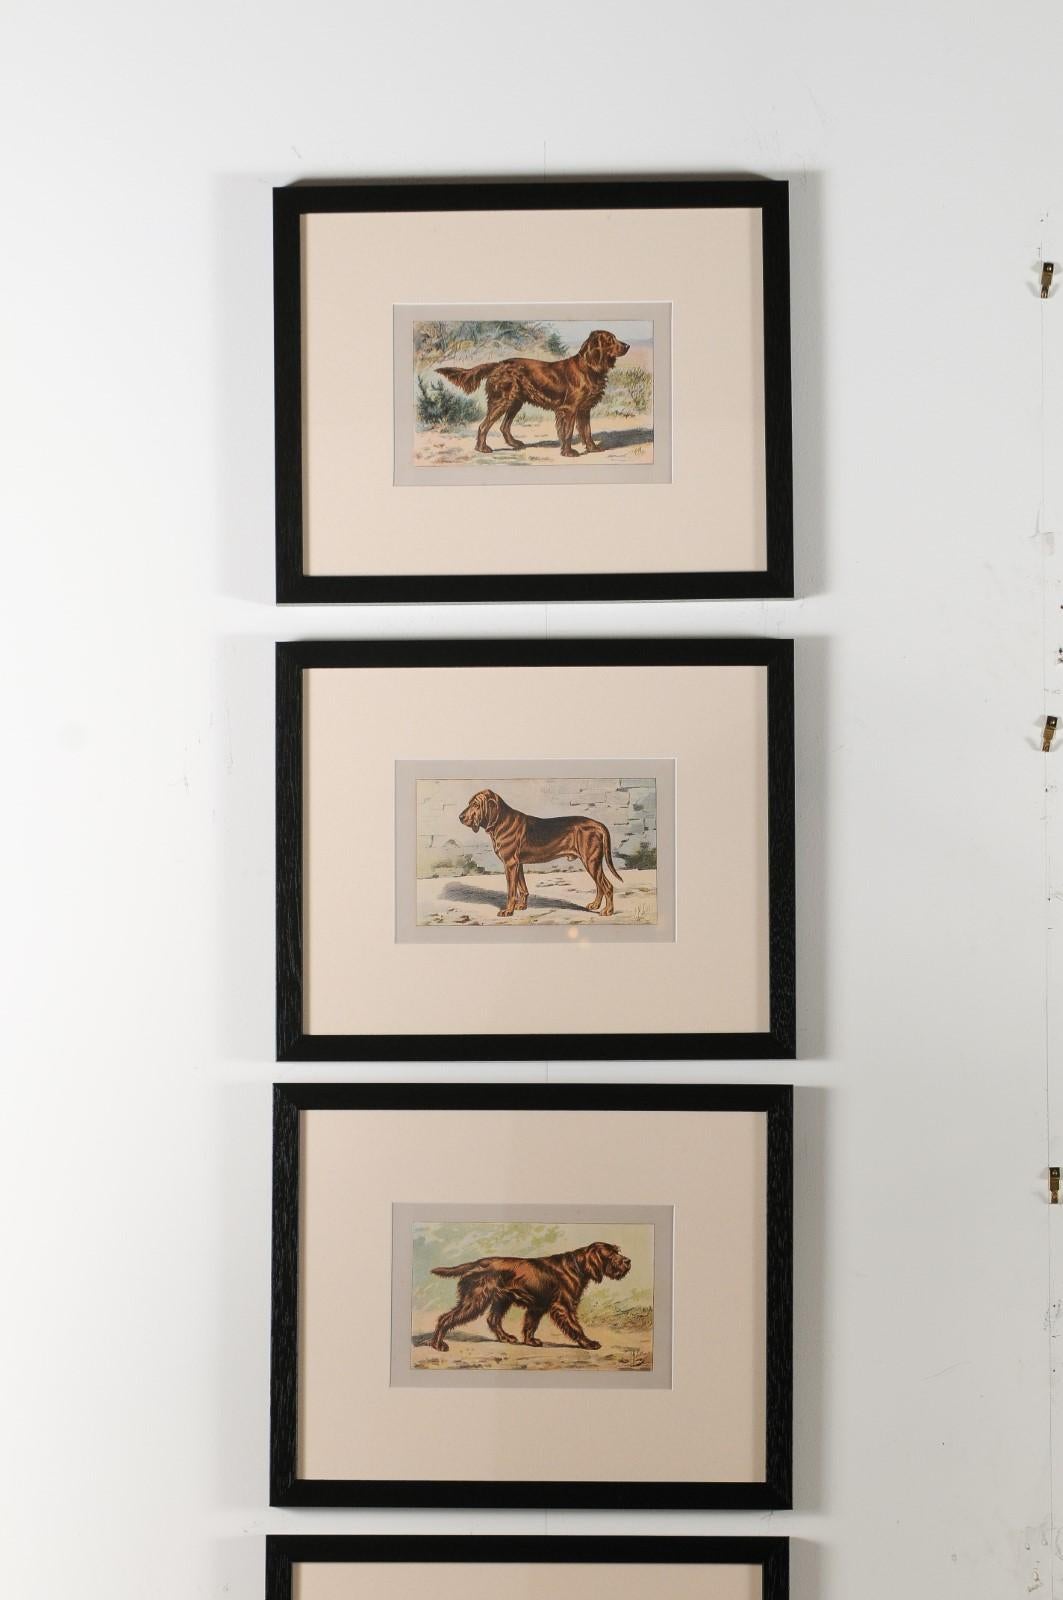 20th Century P. Mahler Custom Framed Lithographs Depicting Hunting Dogs in Outdoor Scenes